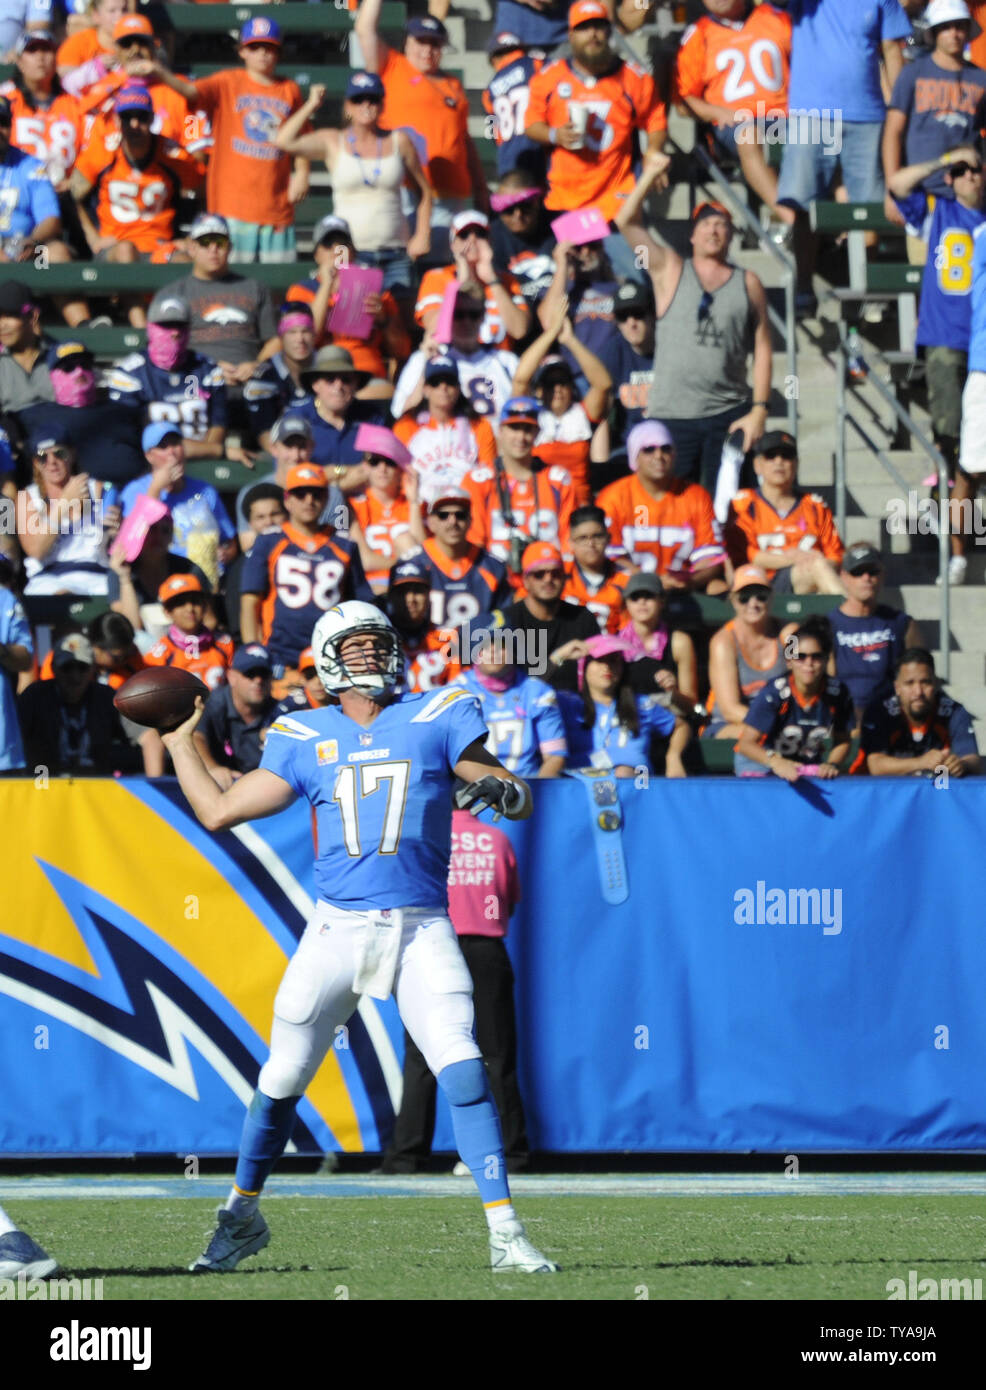 Los Angeles Chargers Philip Rivers throws a pass against the